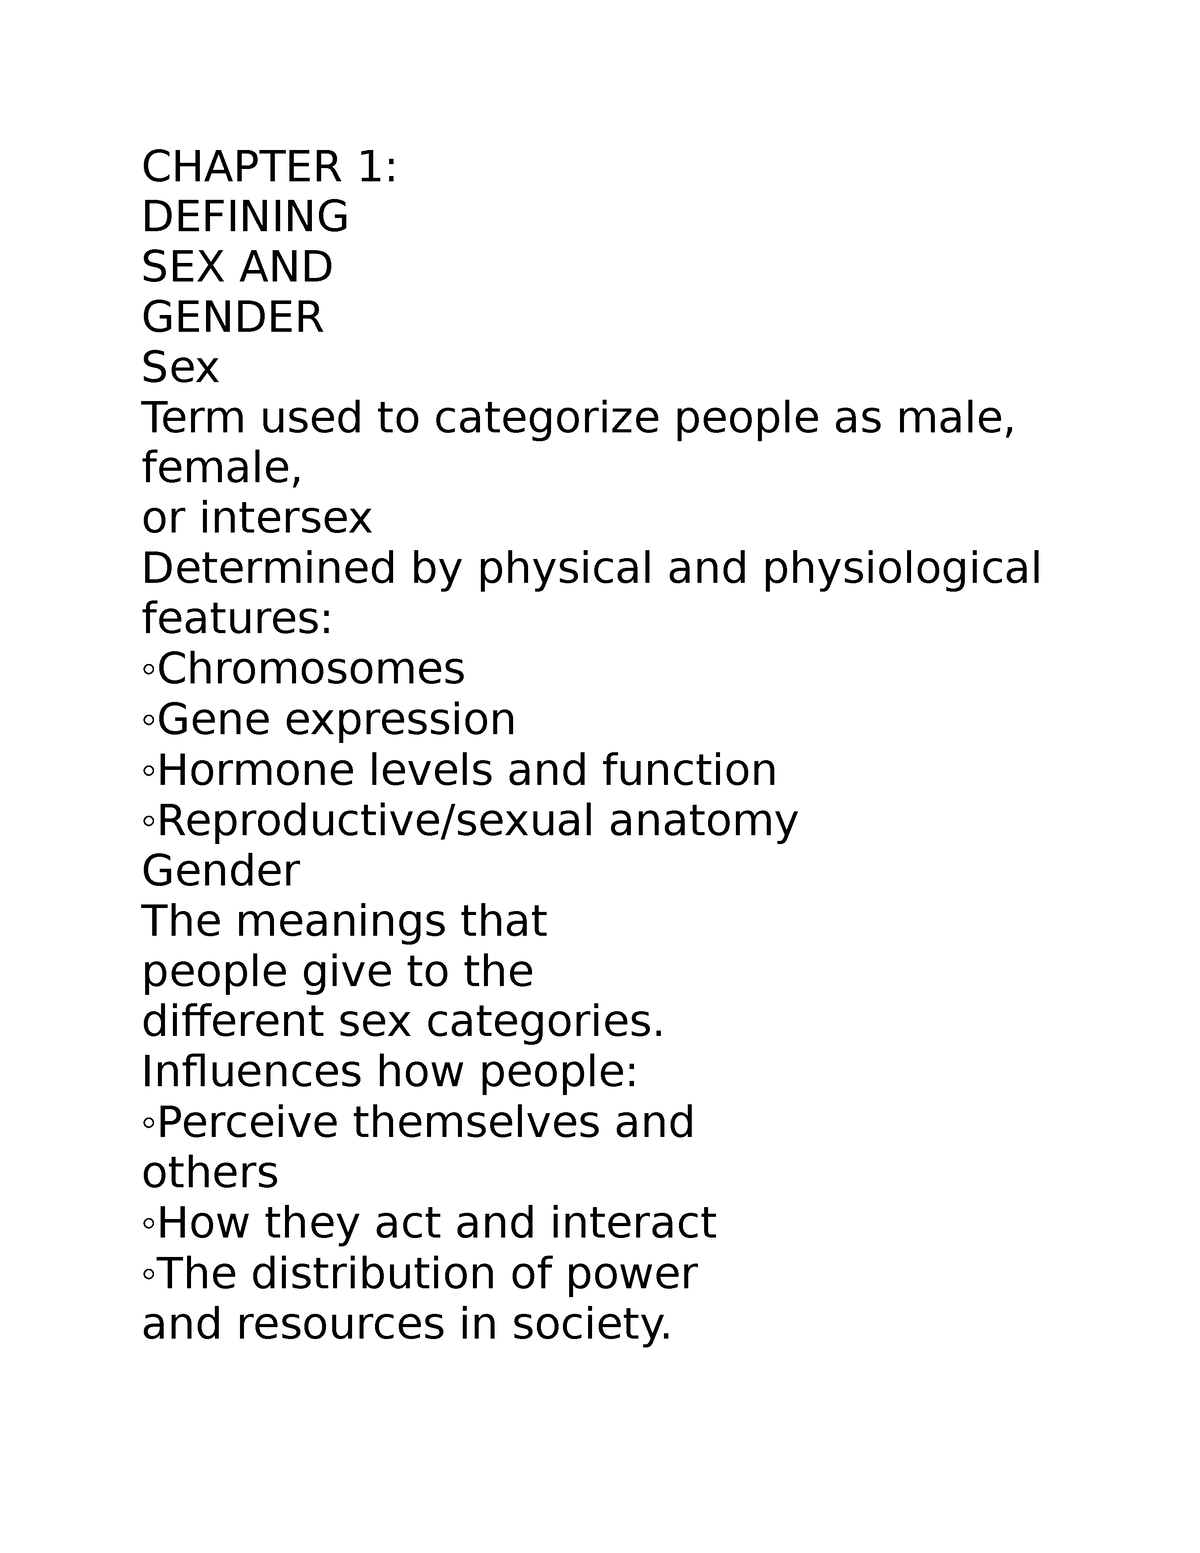 Sex And Gender Notes Chapter 1 Defining Sex And Gender Sex Term 8845